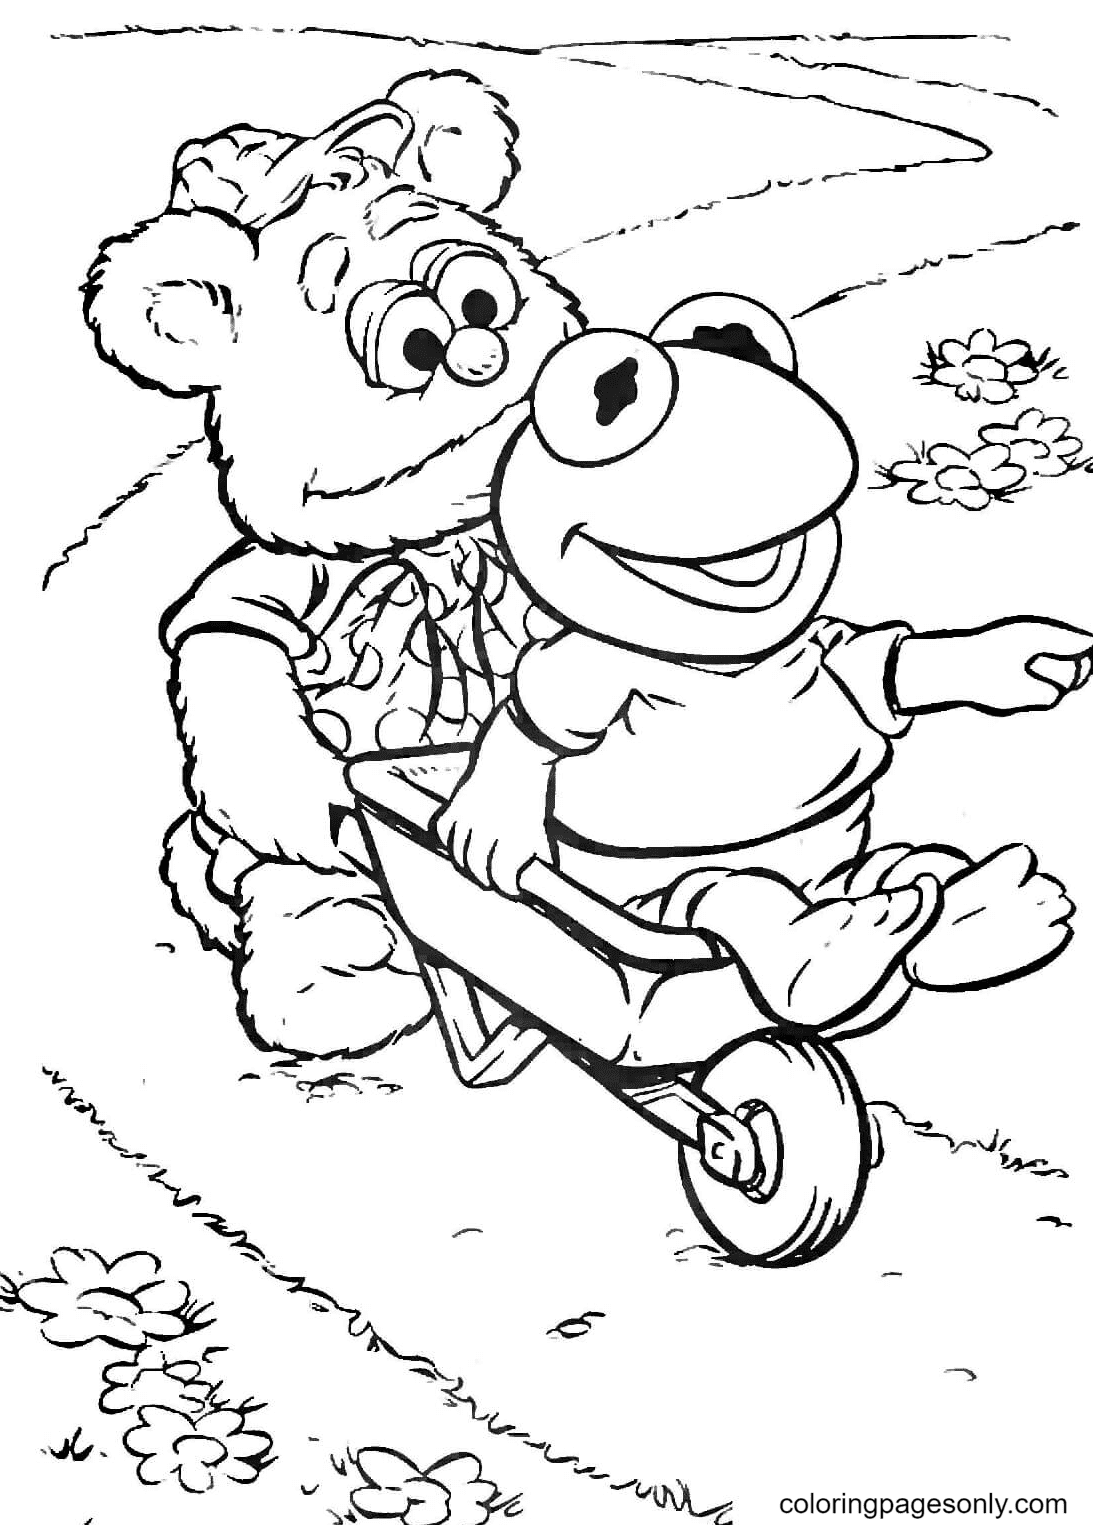 Fozzie and Kermit in a cart Coloring Page